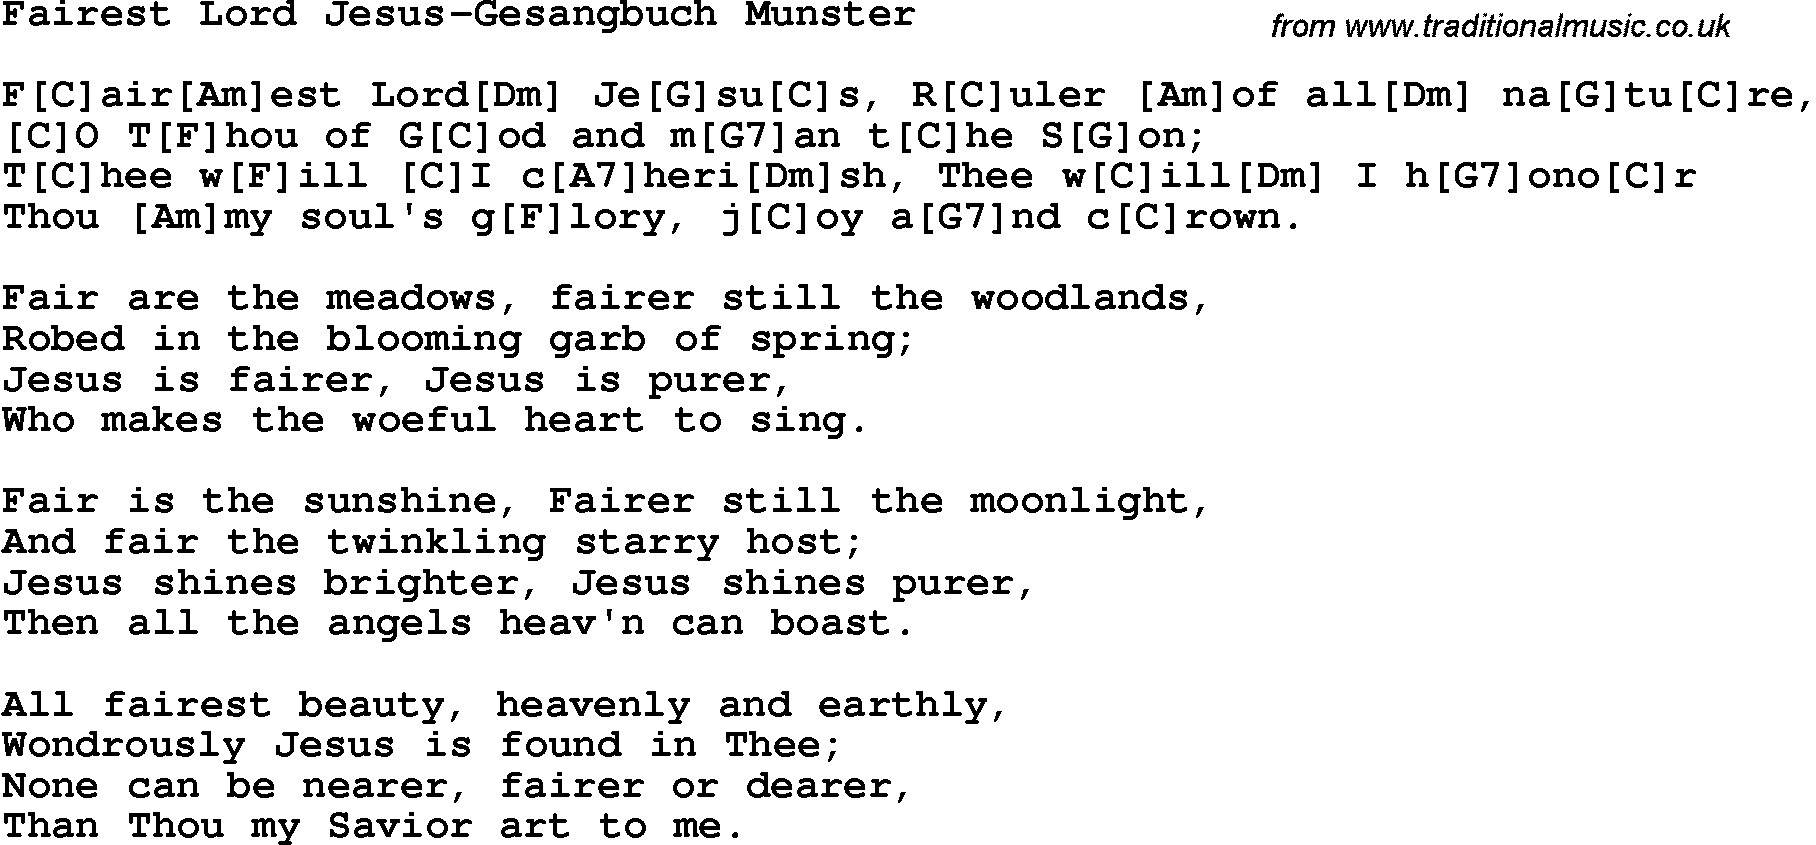 Country, Southern and Bluegrass Gospel Song Fairest Lord Jesus-Gesangbuch Munster lyrics and chords